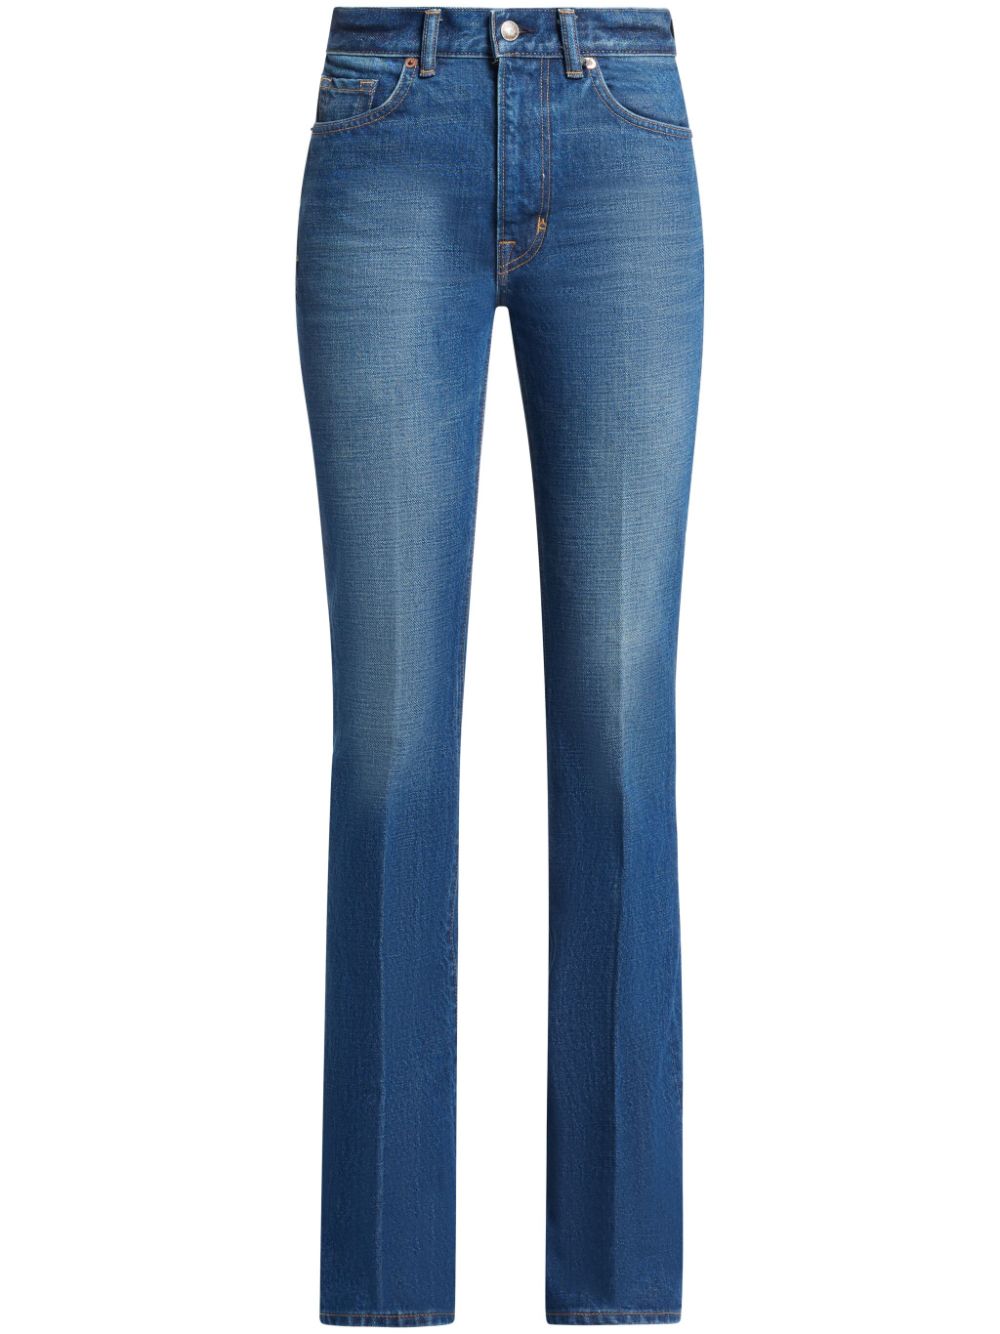 TOM FORD stonewashed flared jeans - Blue von TOM FORD